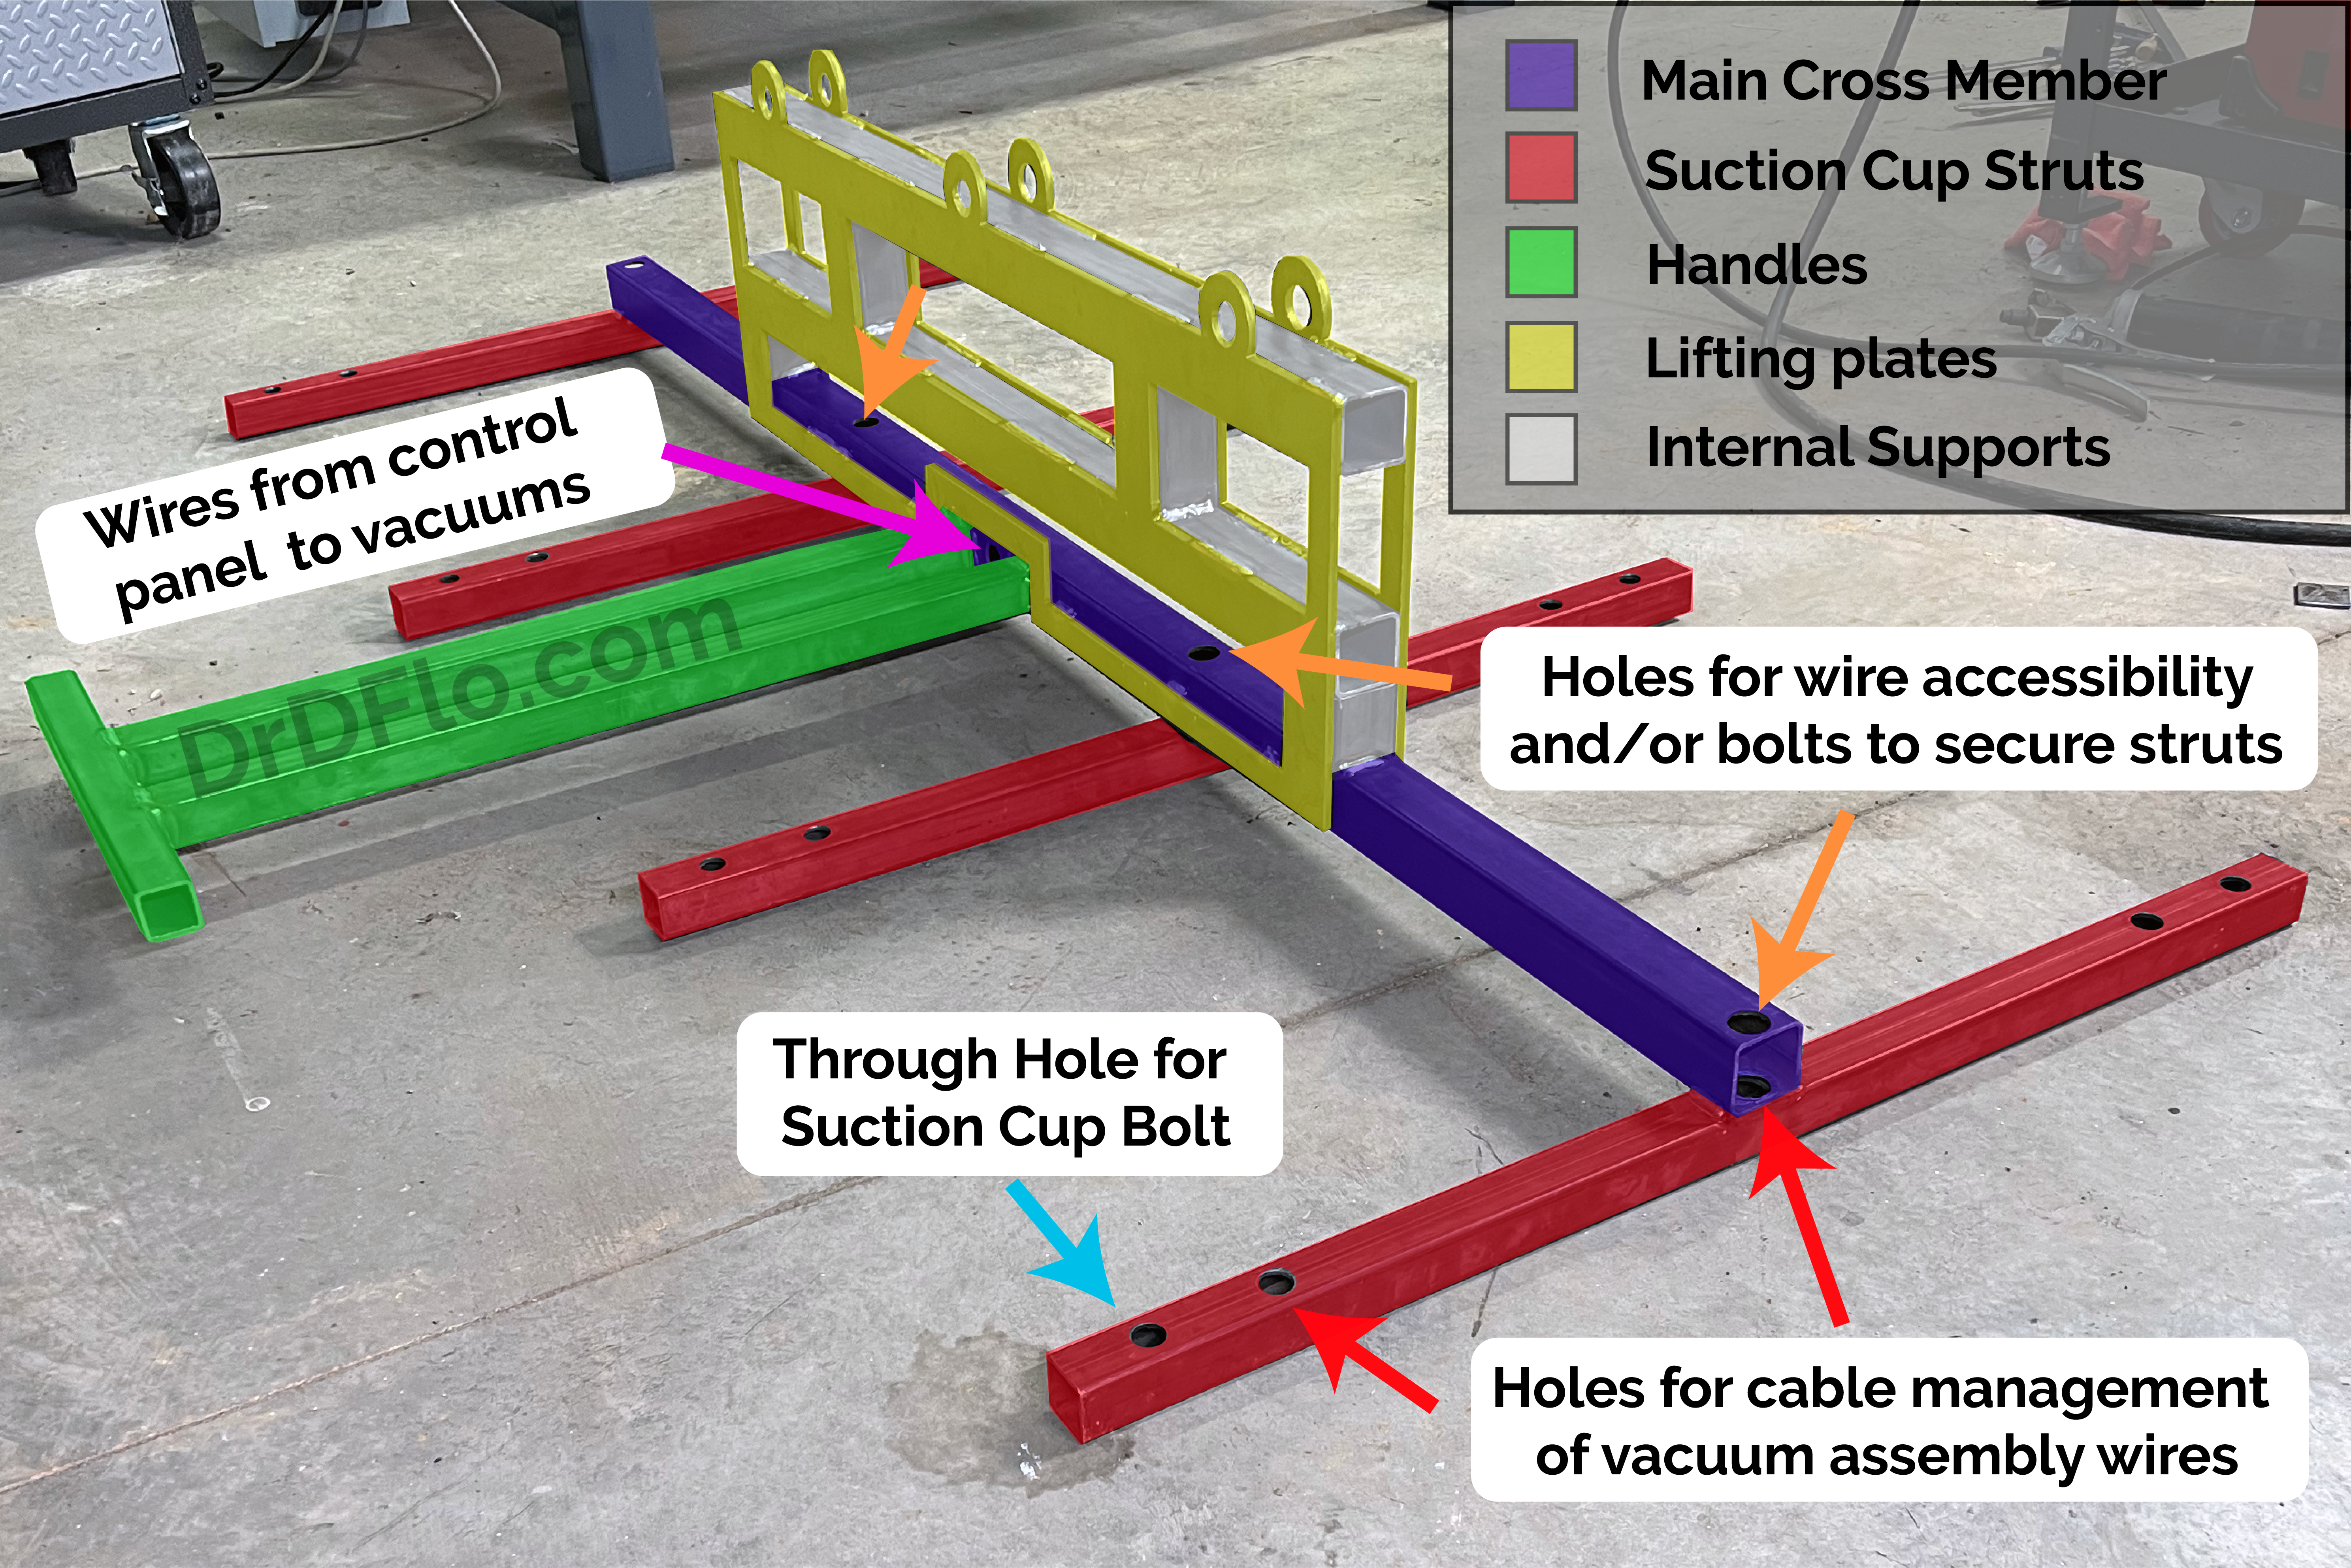 Vacuum lifter's frame labeled